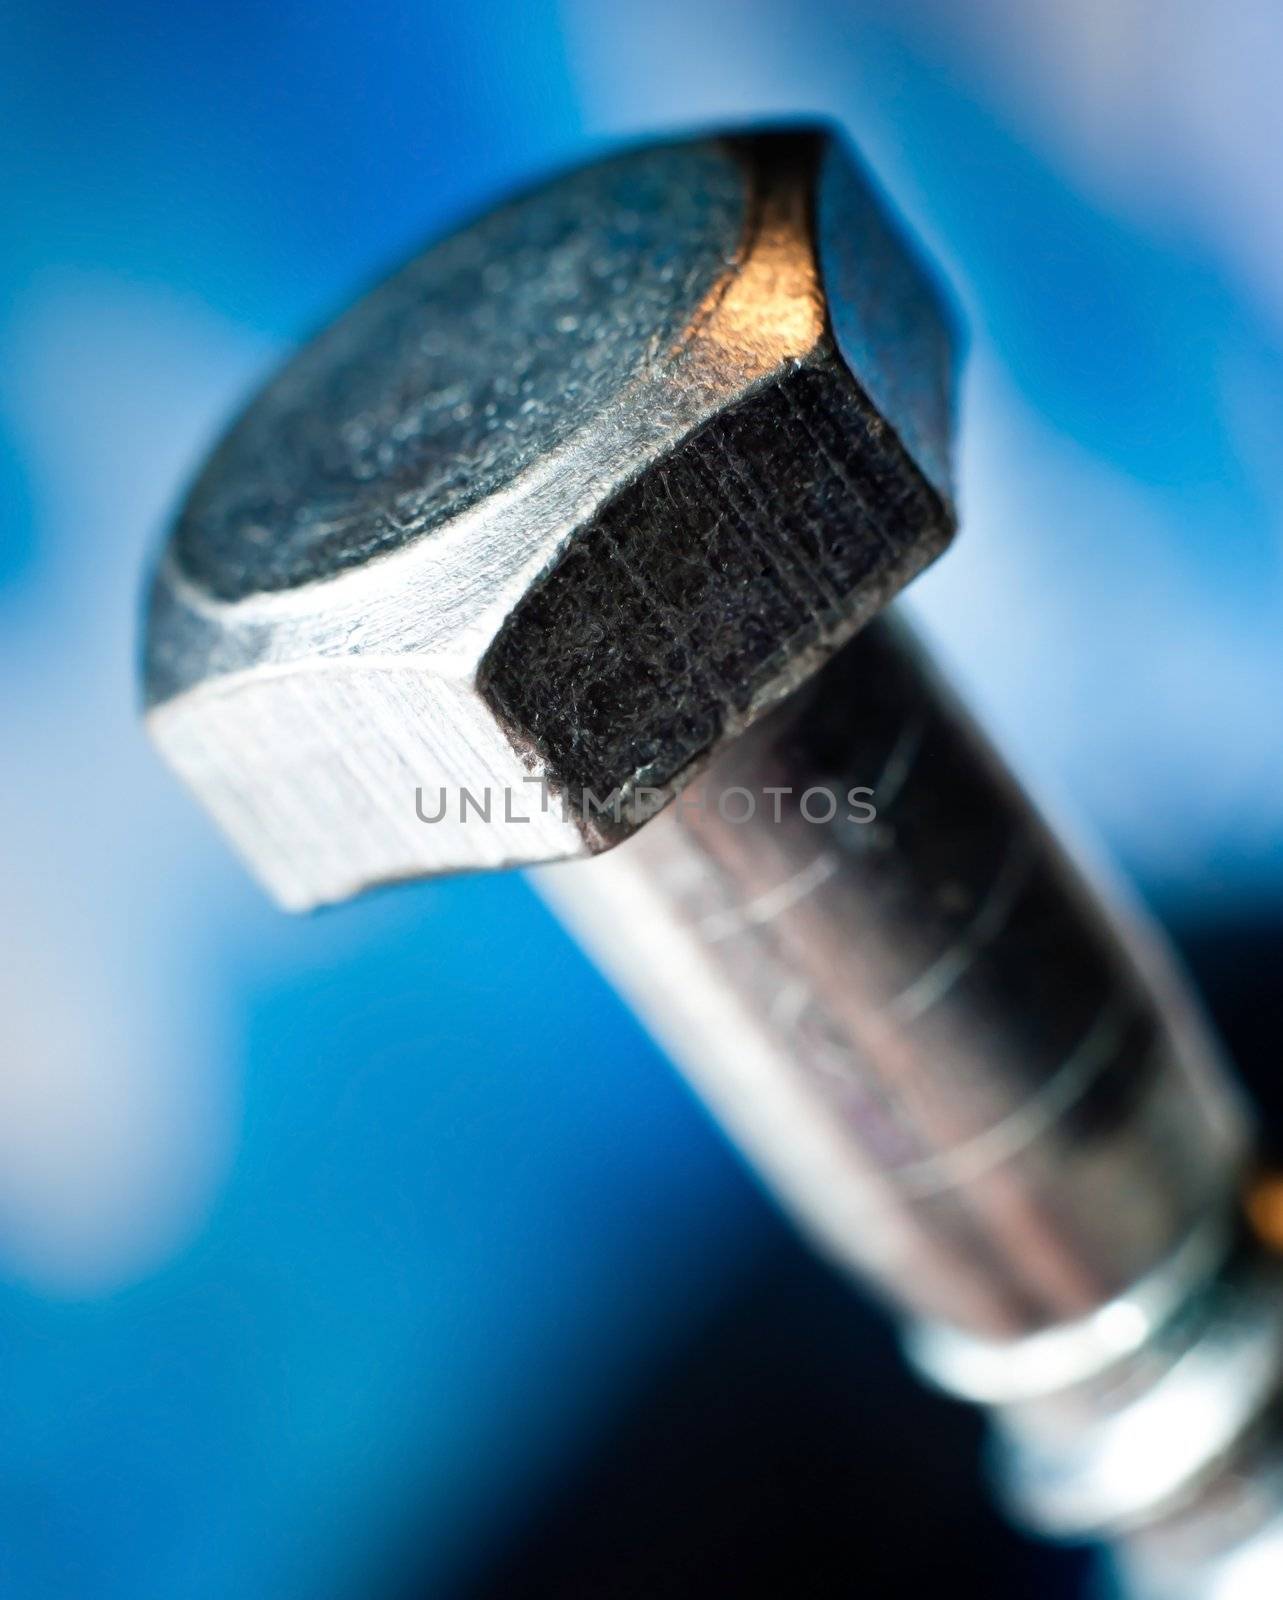 metal bolt heads with blue blur background